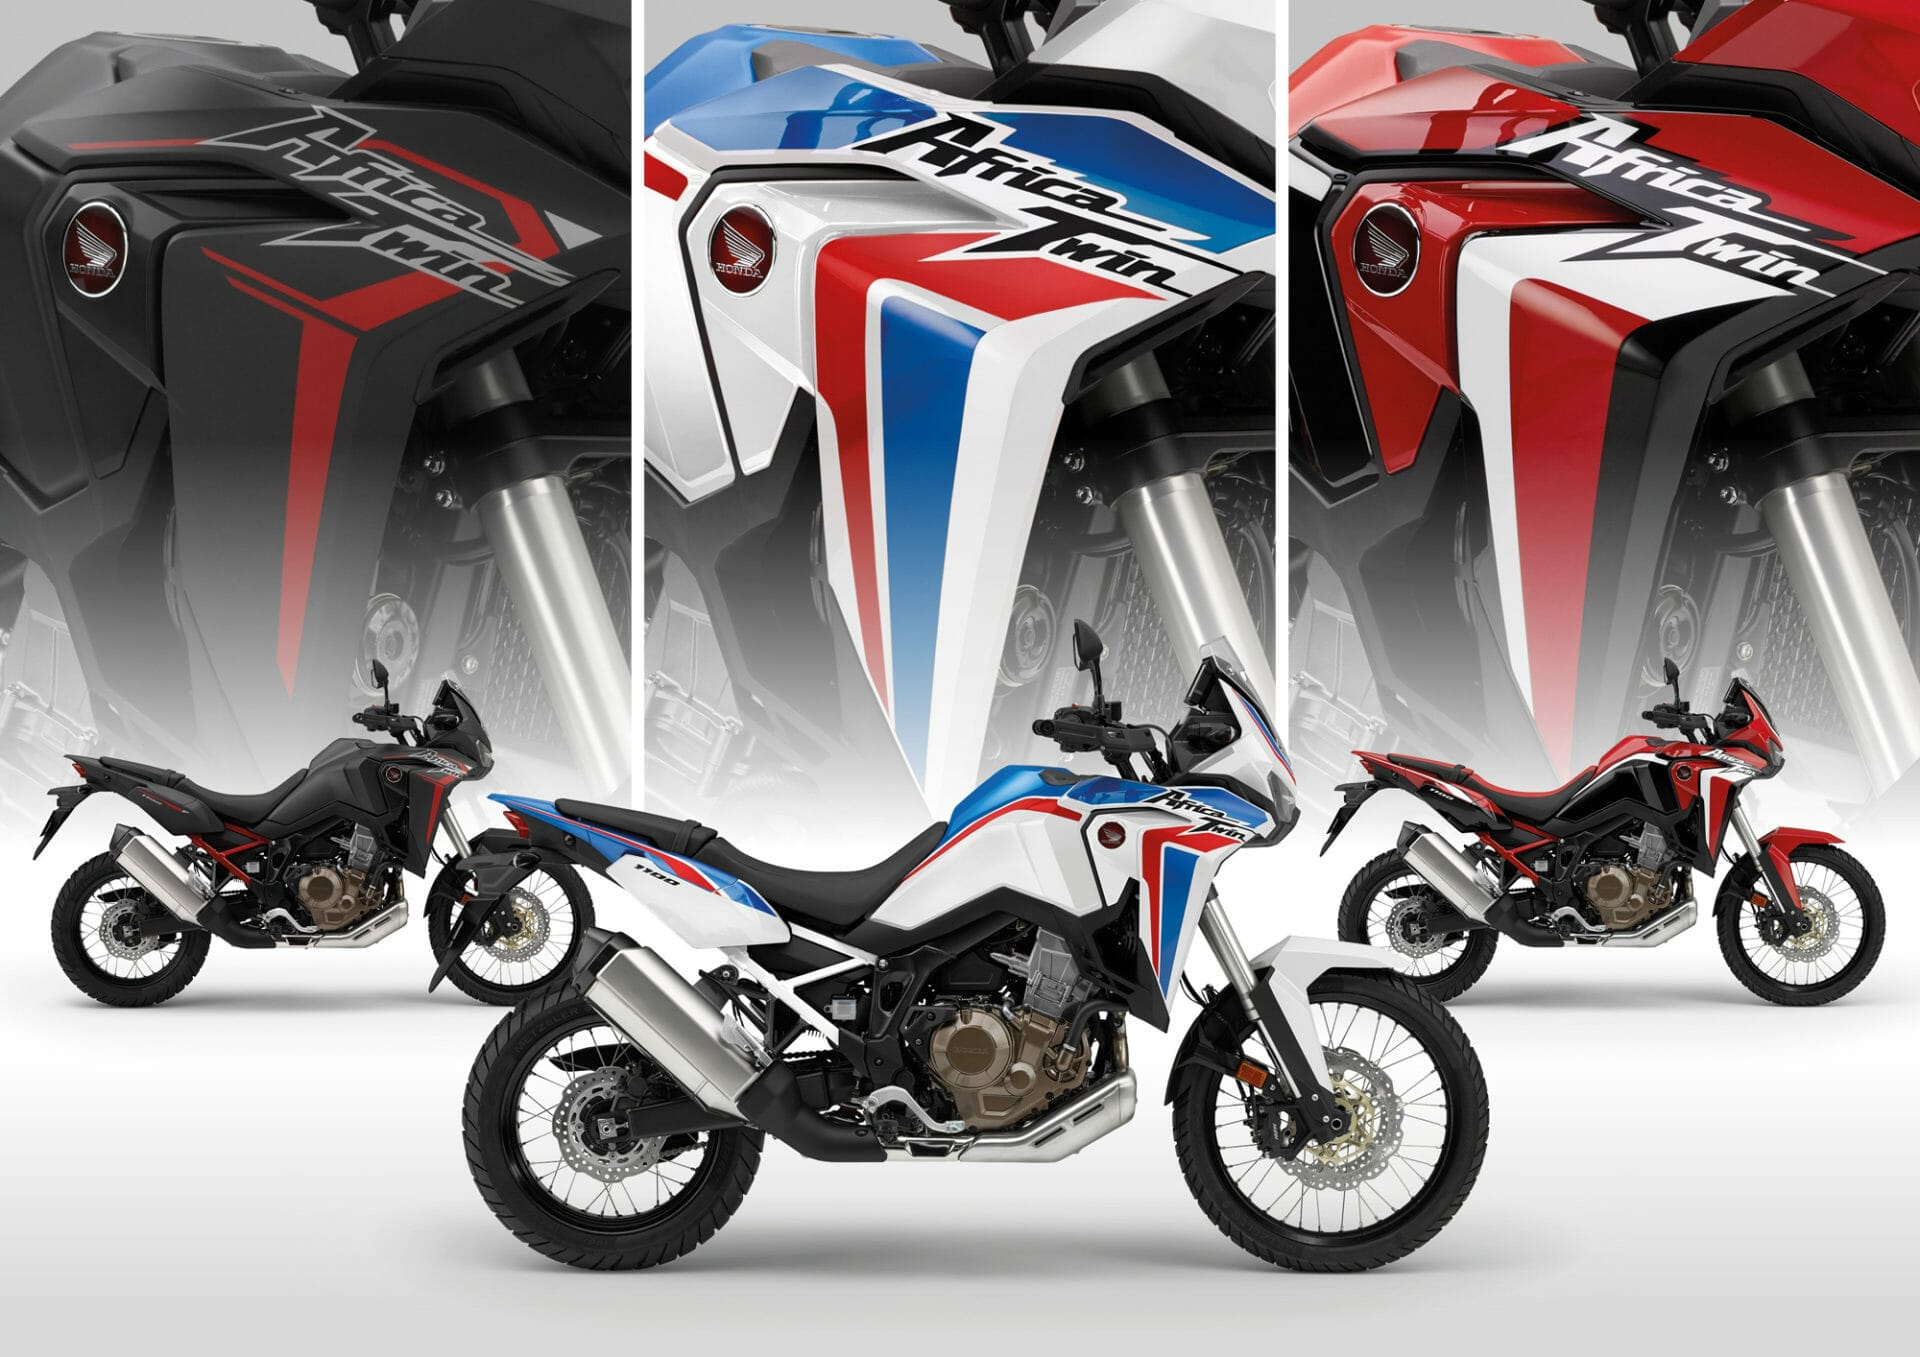 New colors for the Africa Twin 2021
- also in the App MOTORCYCLE NEWS